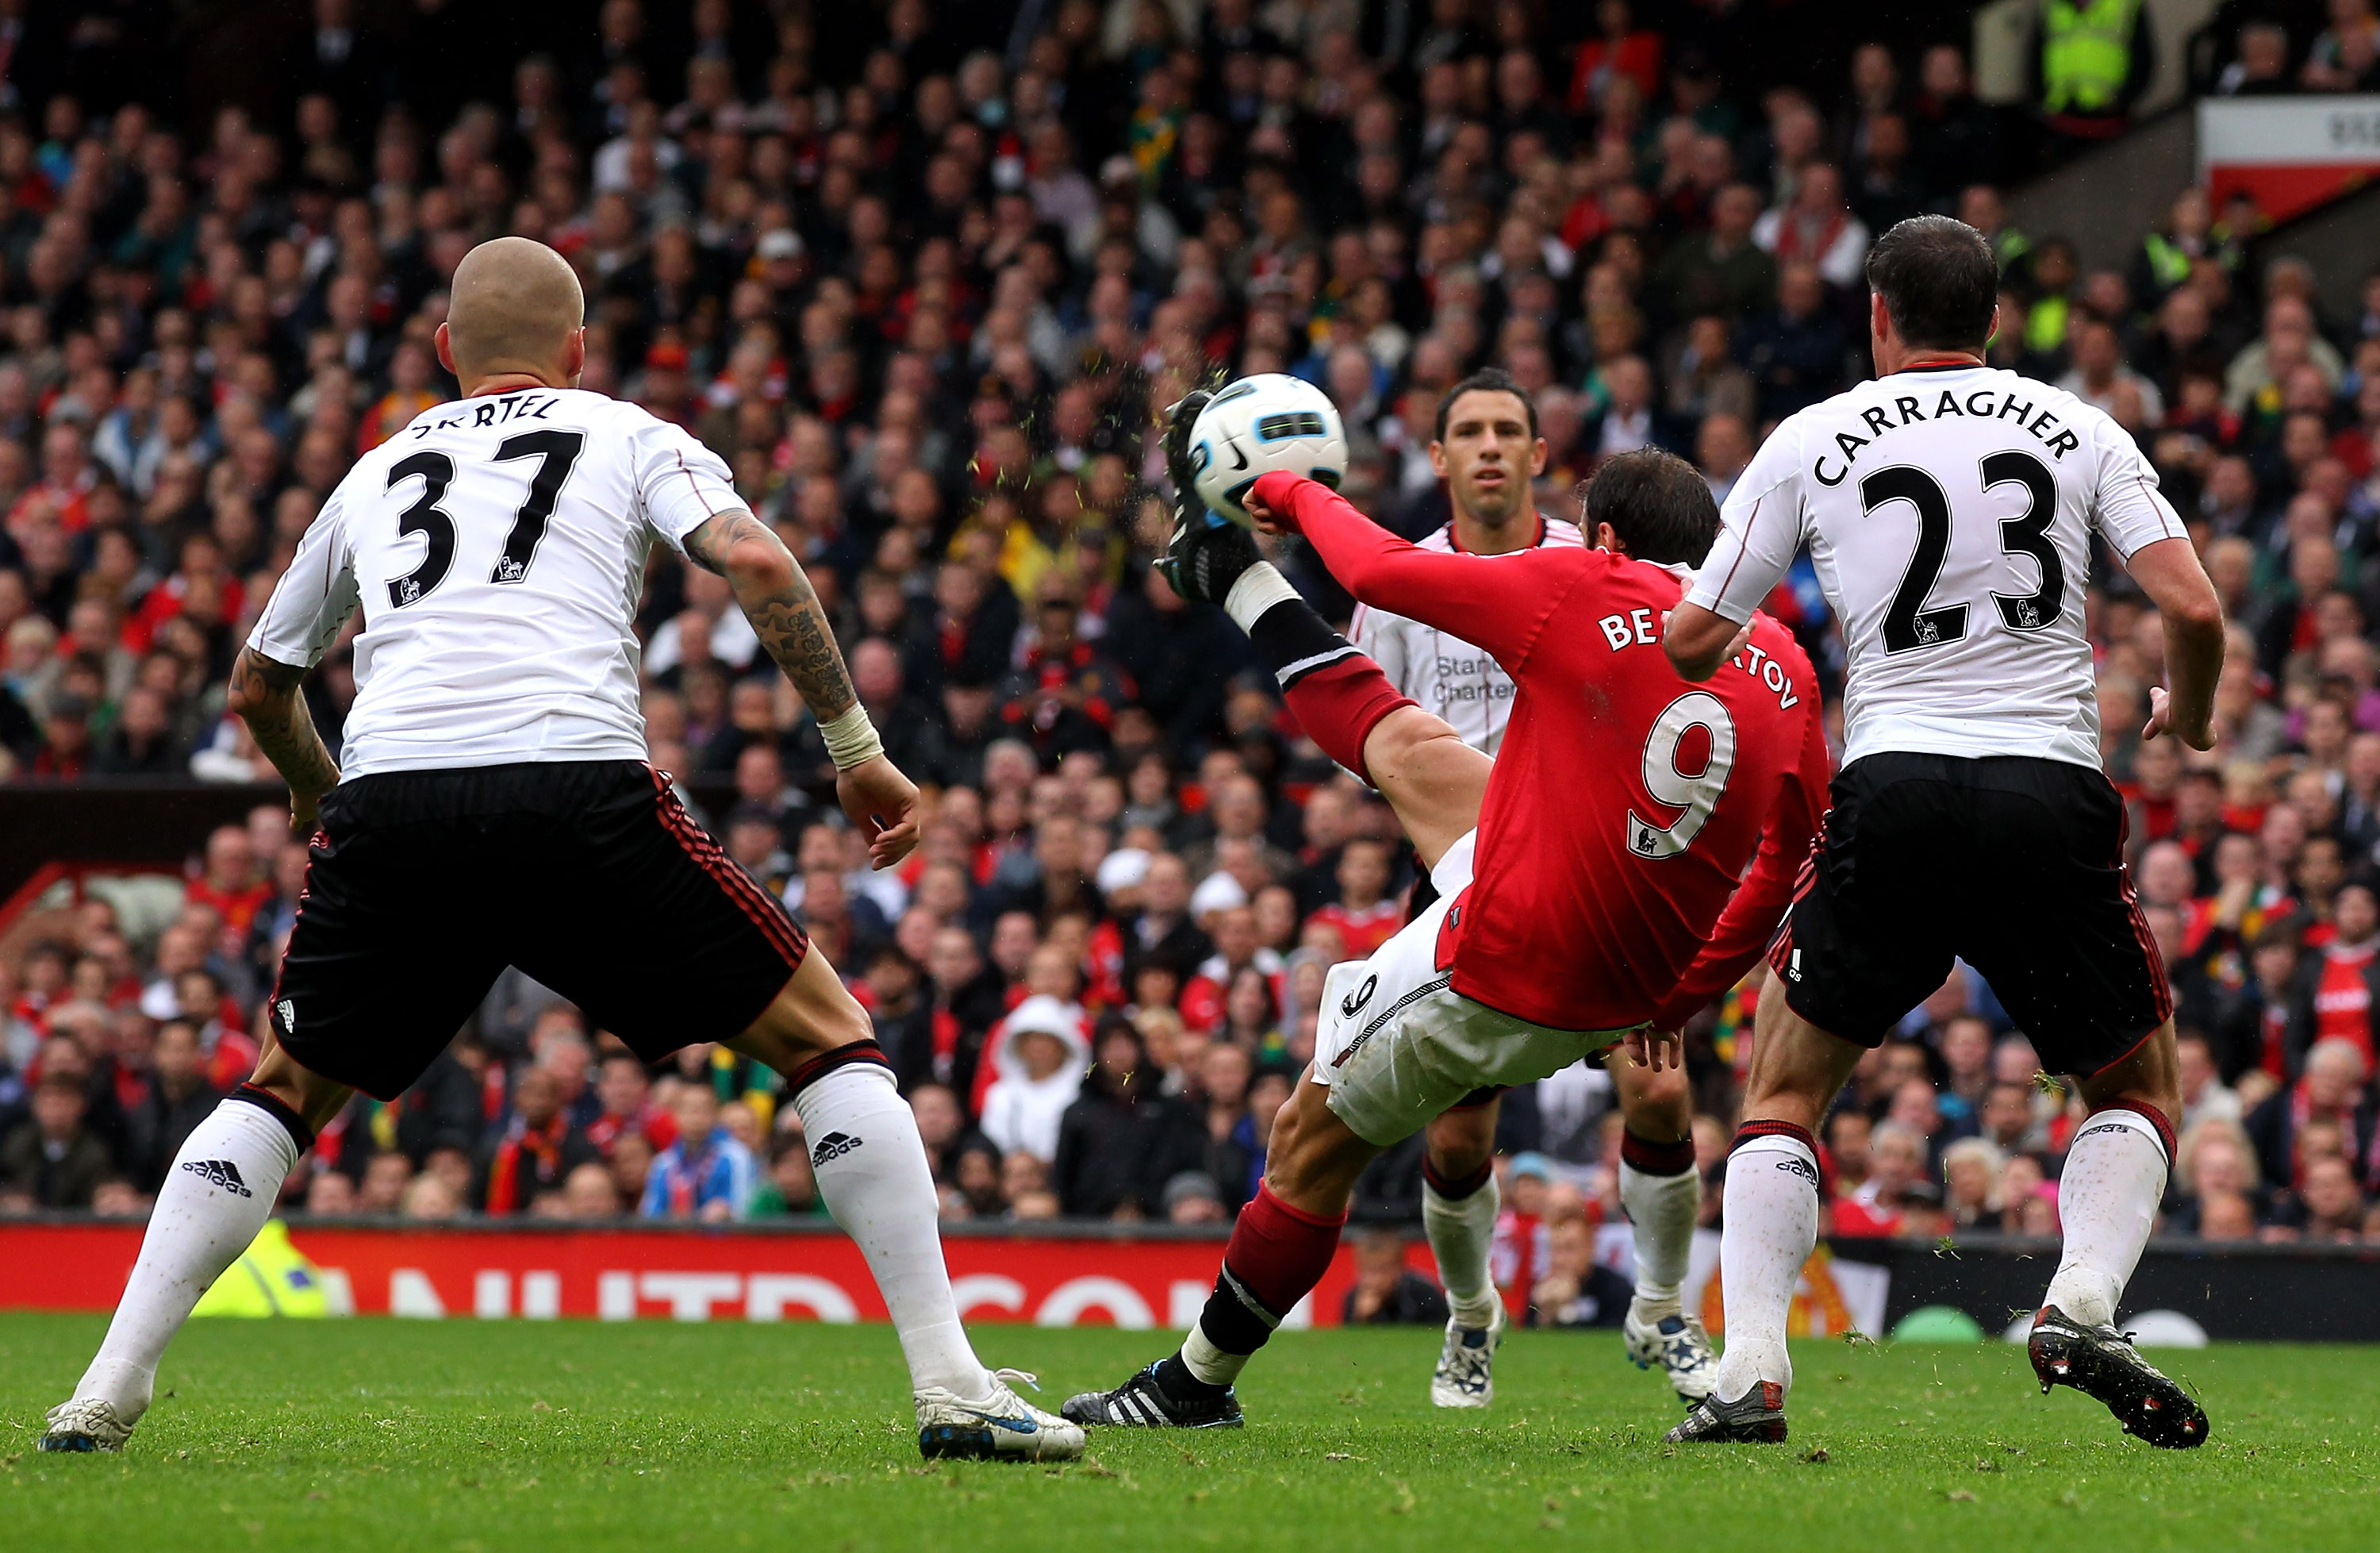 MANCHESTER, ENGLAND - SEPTEMBER 19:  Dimitar Berbatov of Manchester United scores his team's second goal during the Barclays Premier League match between Manchester United and Liverpool at Old Trafford on September 19, 2010 in Manchester, England.  (Photo